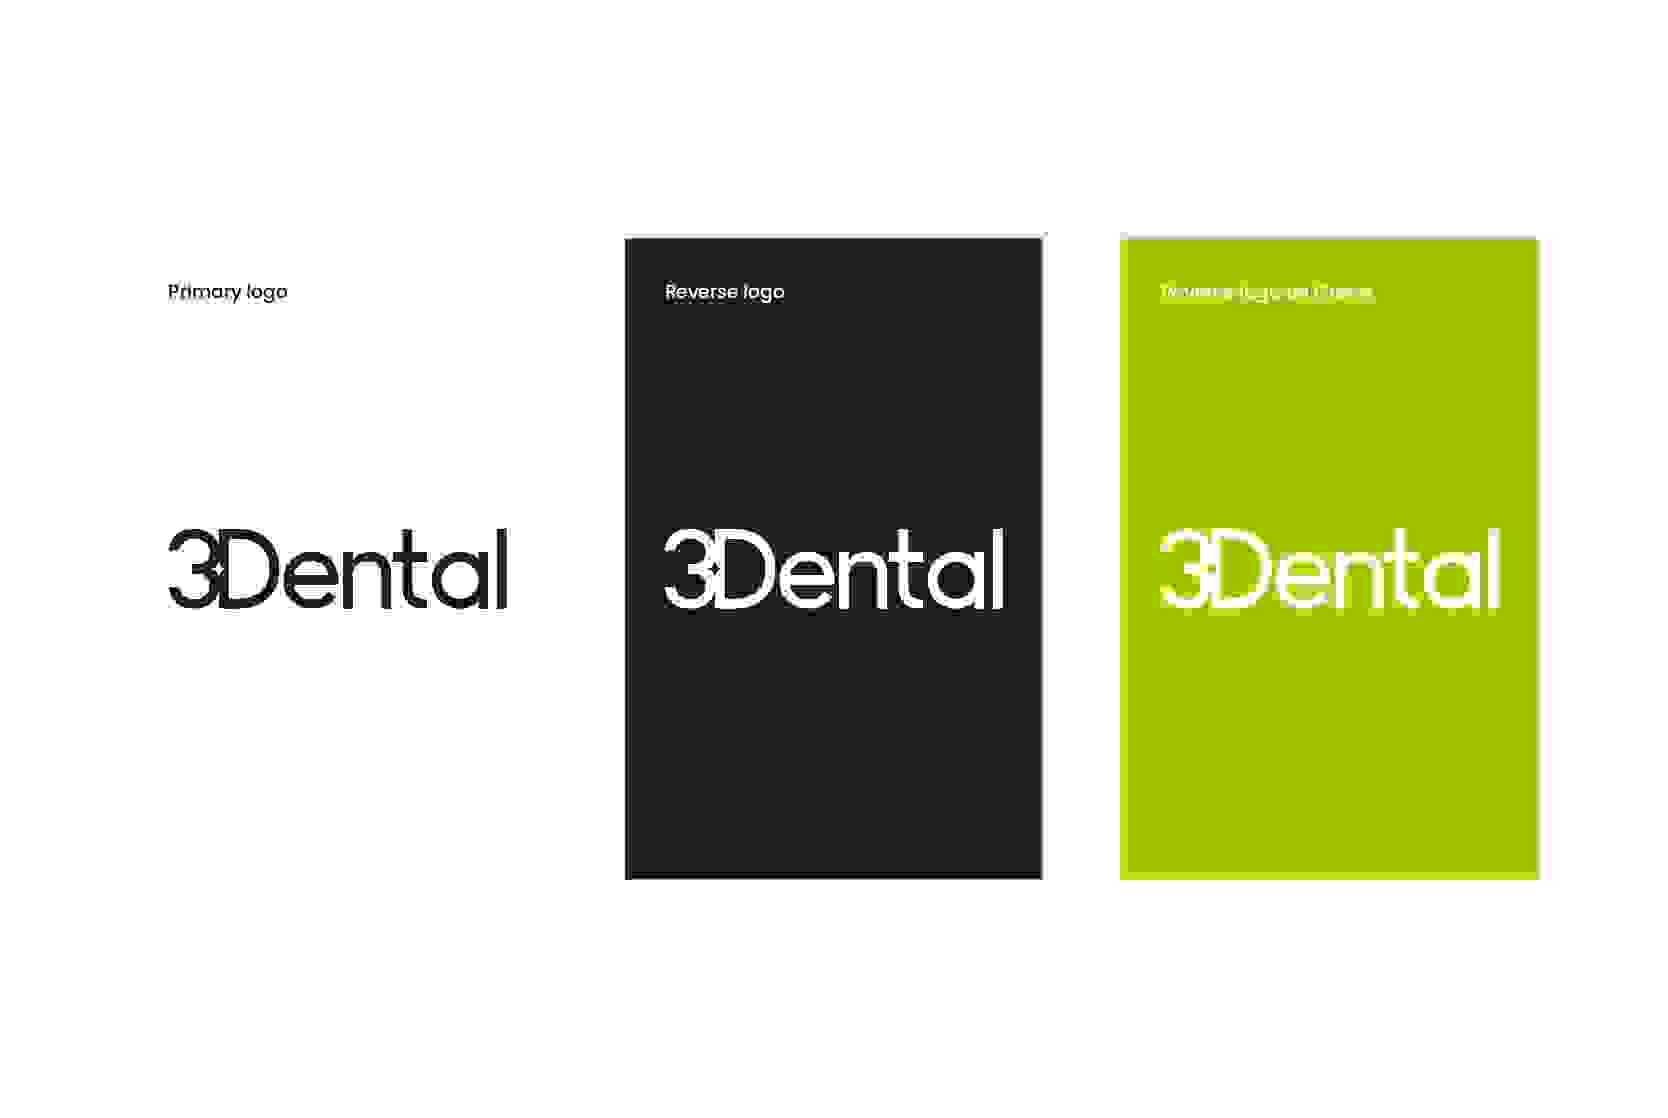 3Dental logos - primary, secondary and reverse logos in black white and lime green